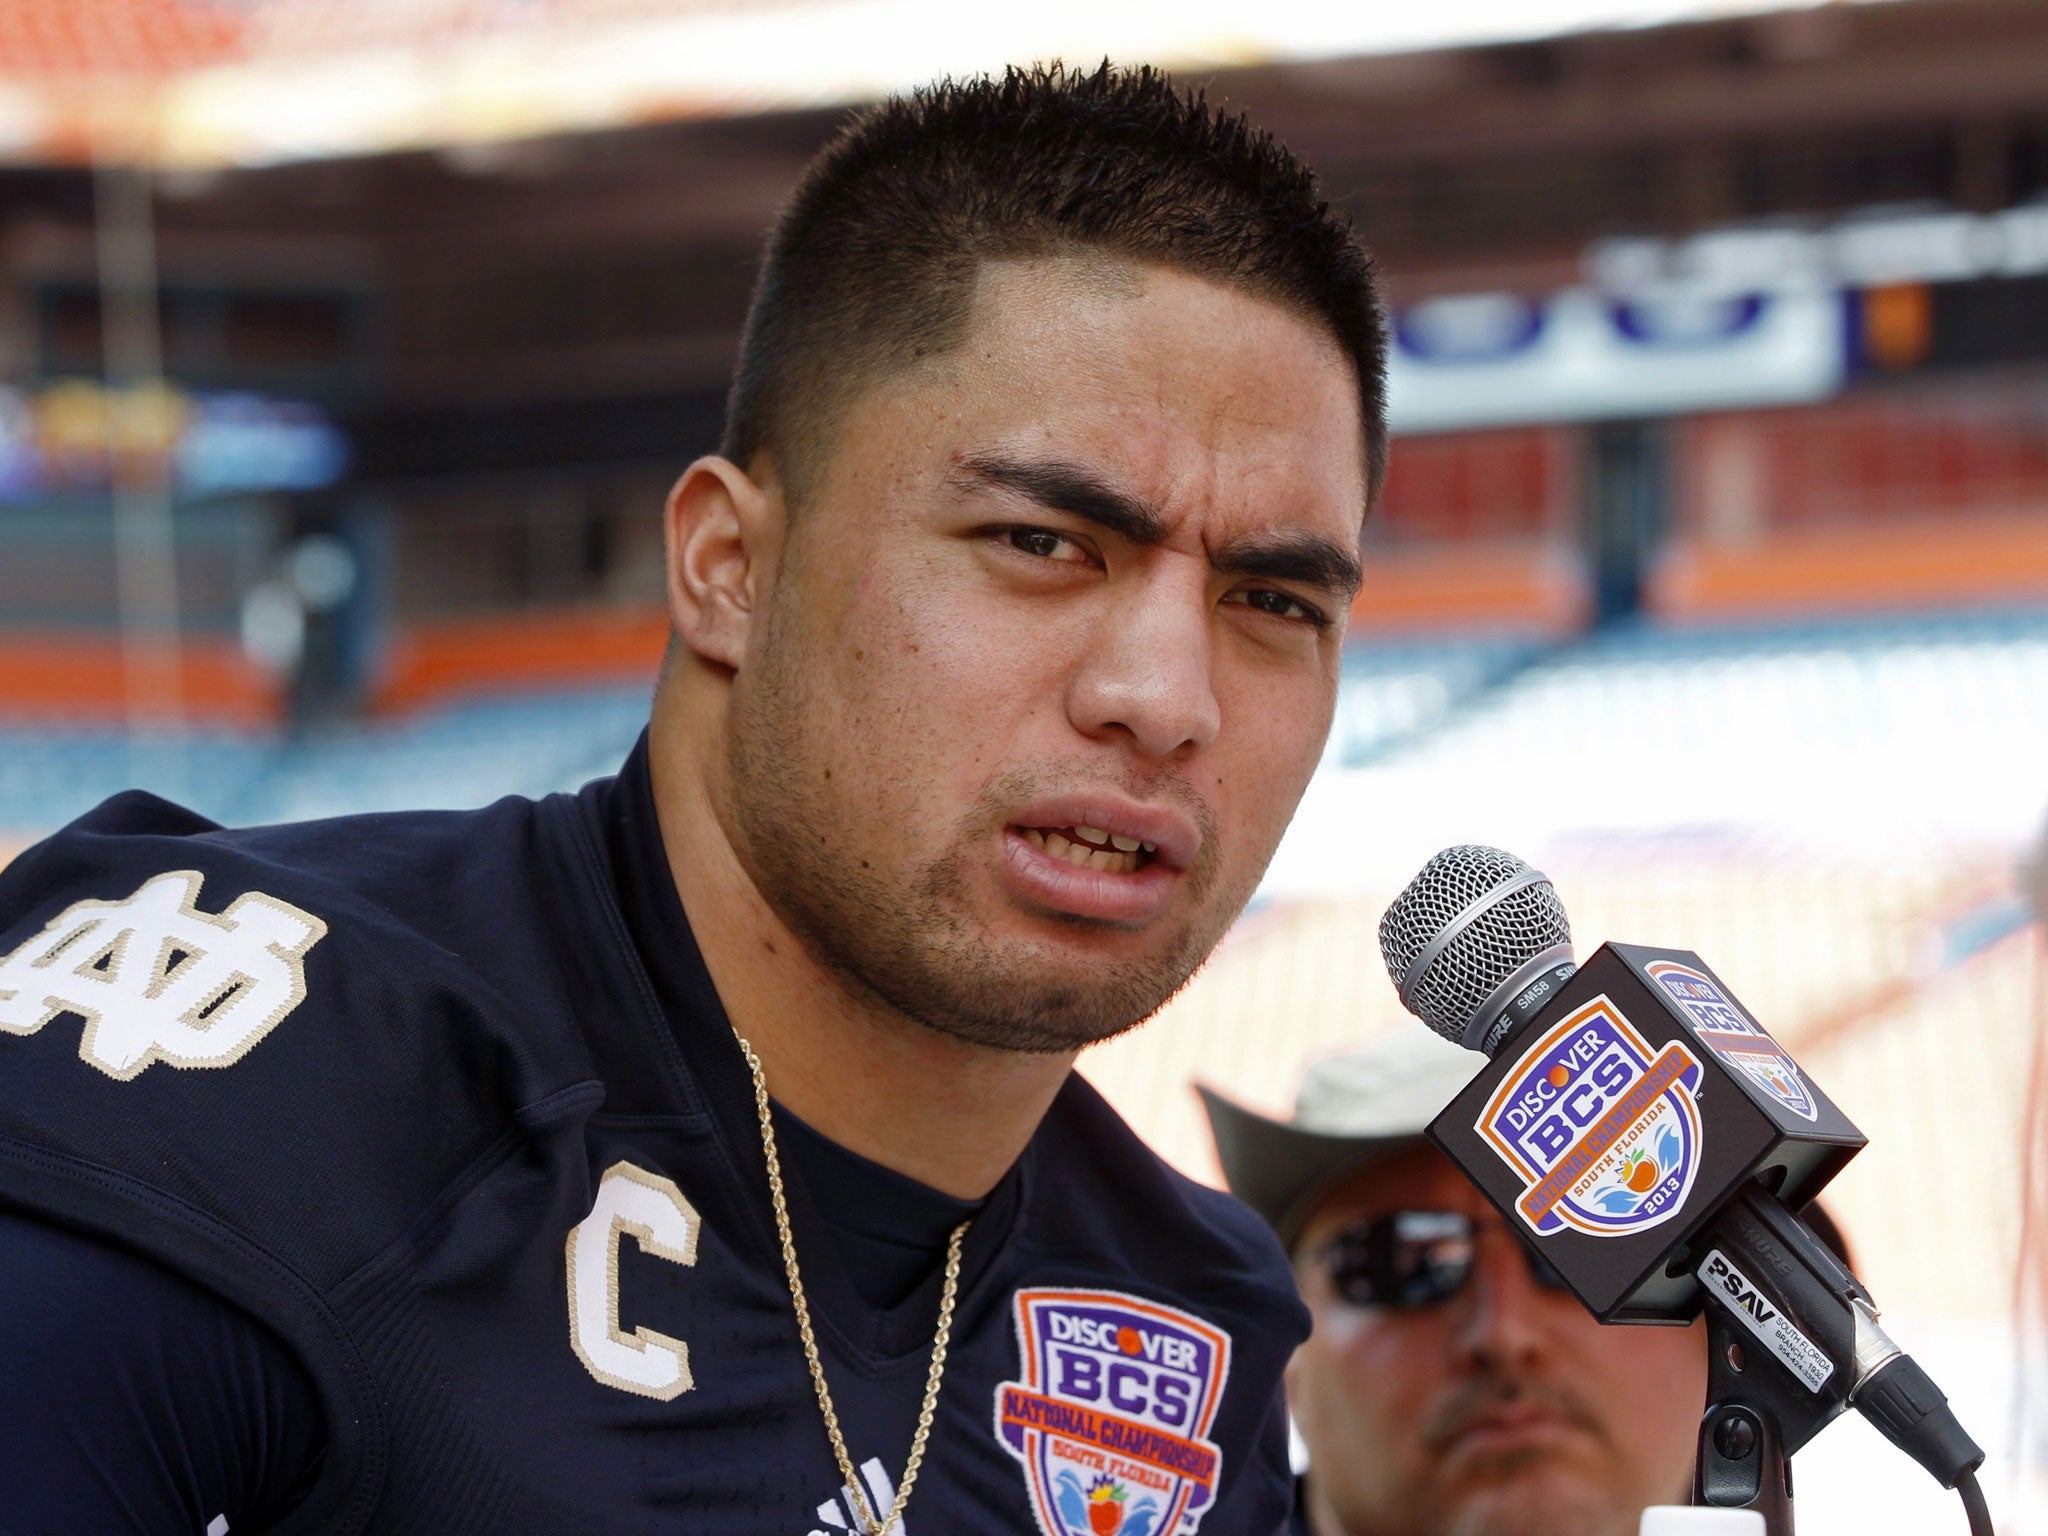 Manti Te'o broke American hearts with the sad story of how his girlfriend died - but it turns out she never existed